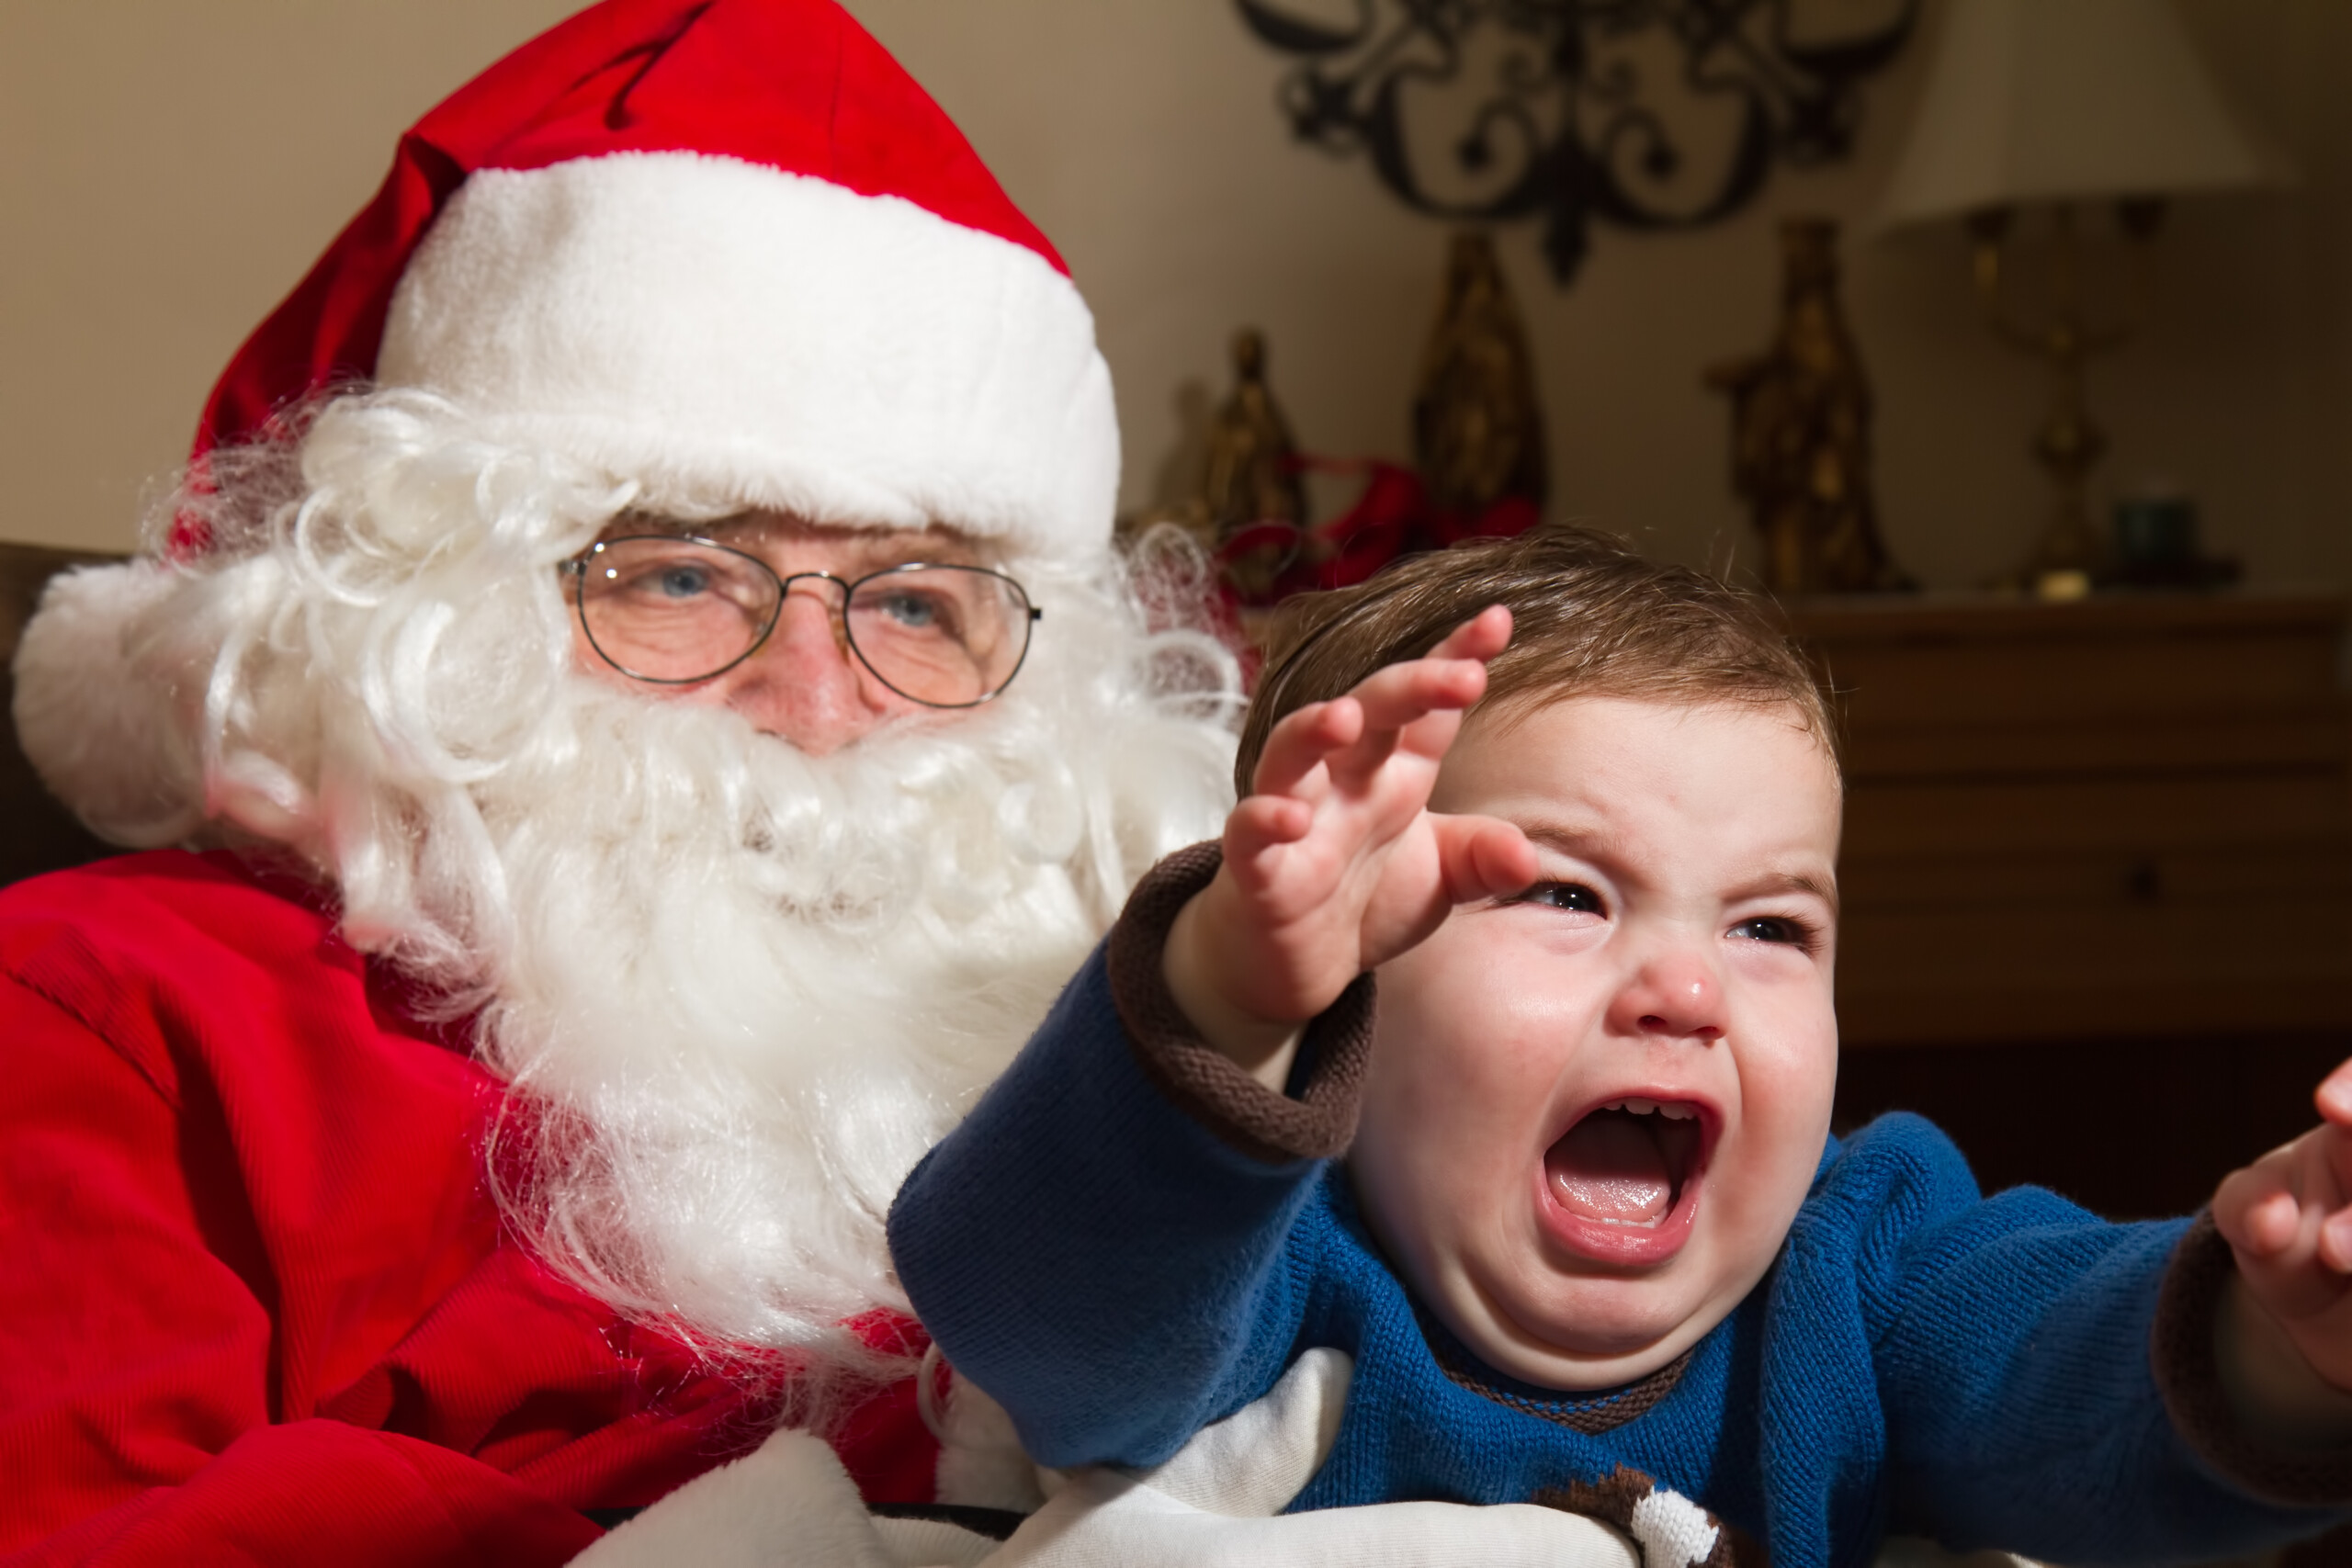 What Should I Do If My Child is Afraid of Santa Claus?